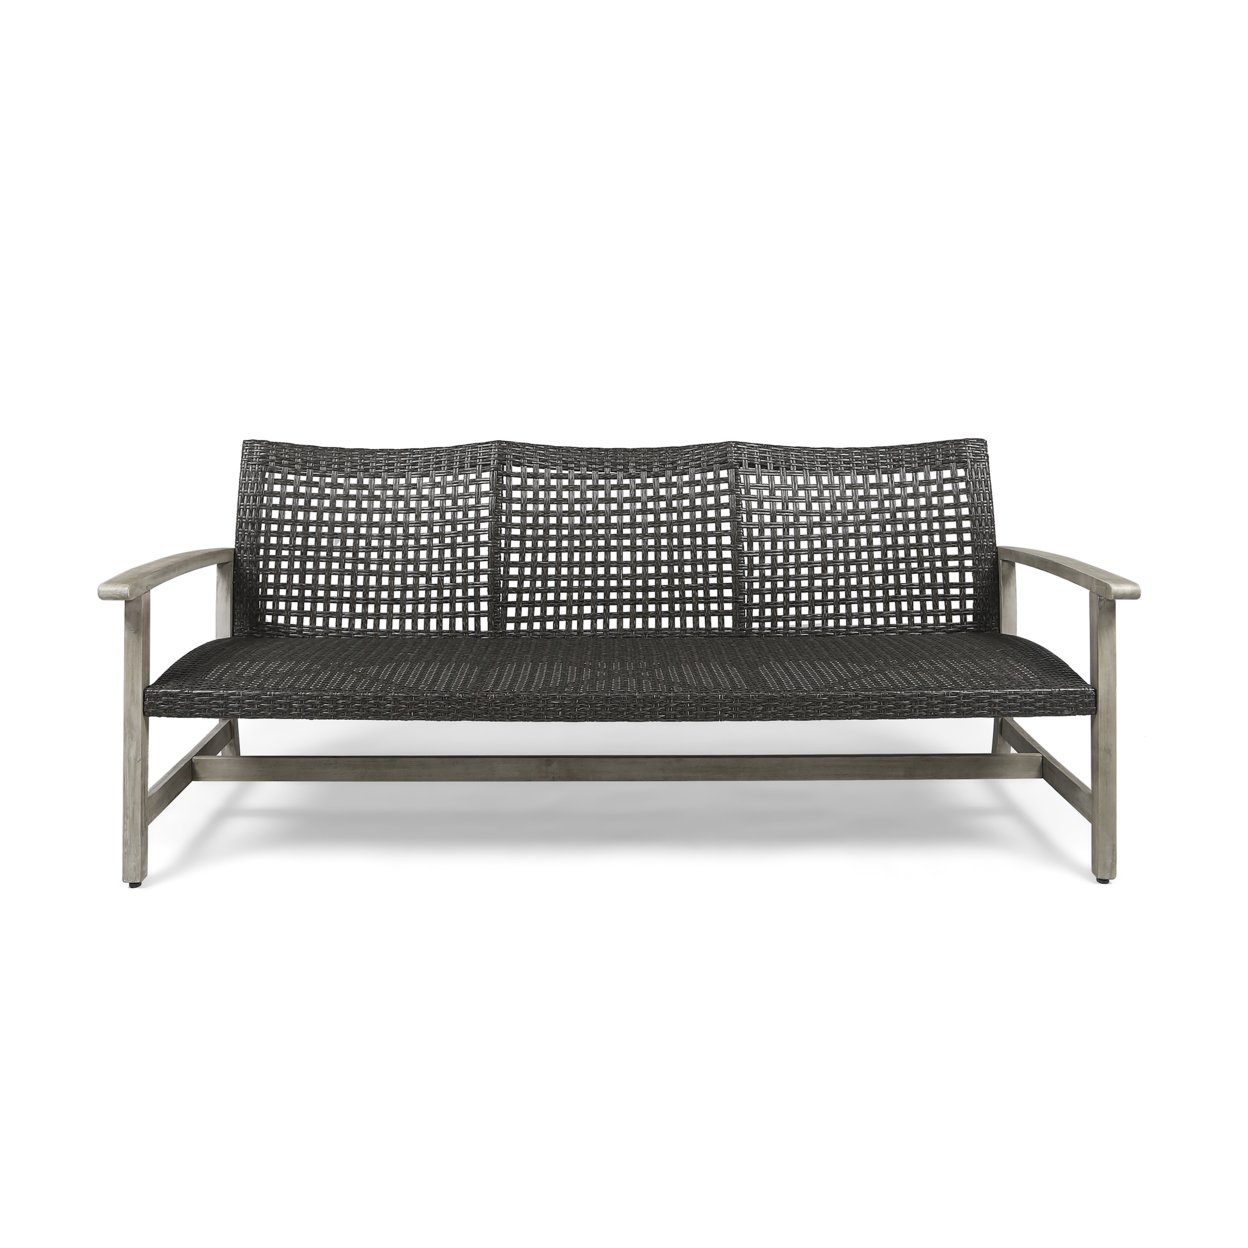 Marcia Outdoor Wood And Wicker Sofa - Gray / Natural